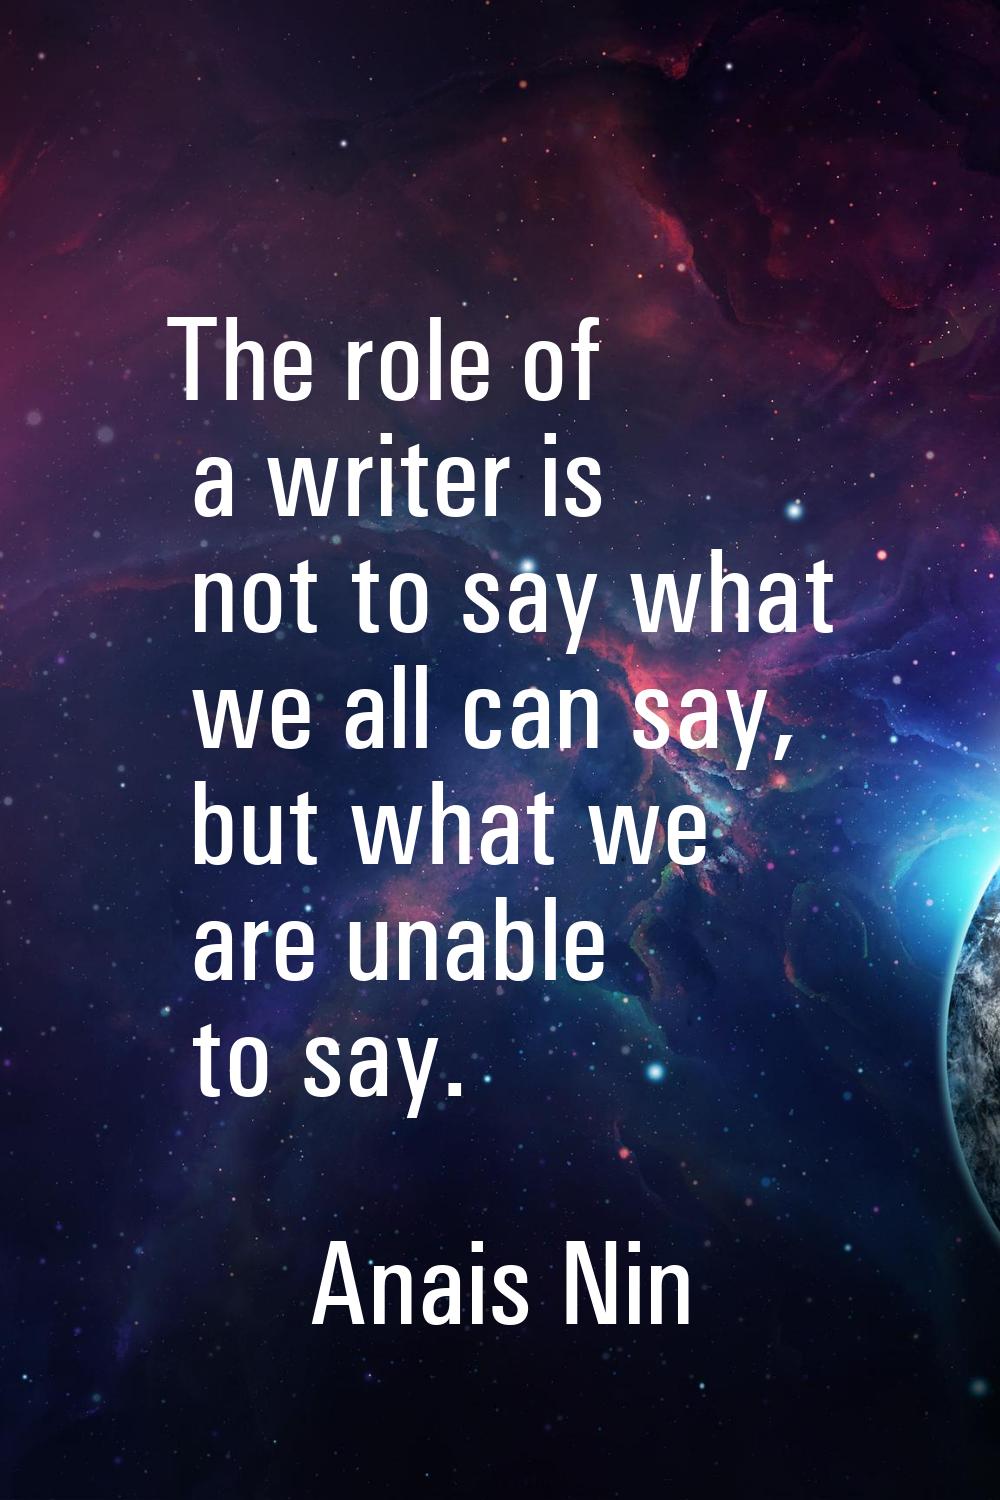 The role of a writer is not to say what we all can say, but what we are unable to say.